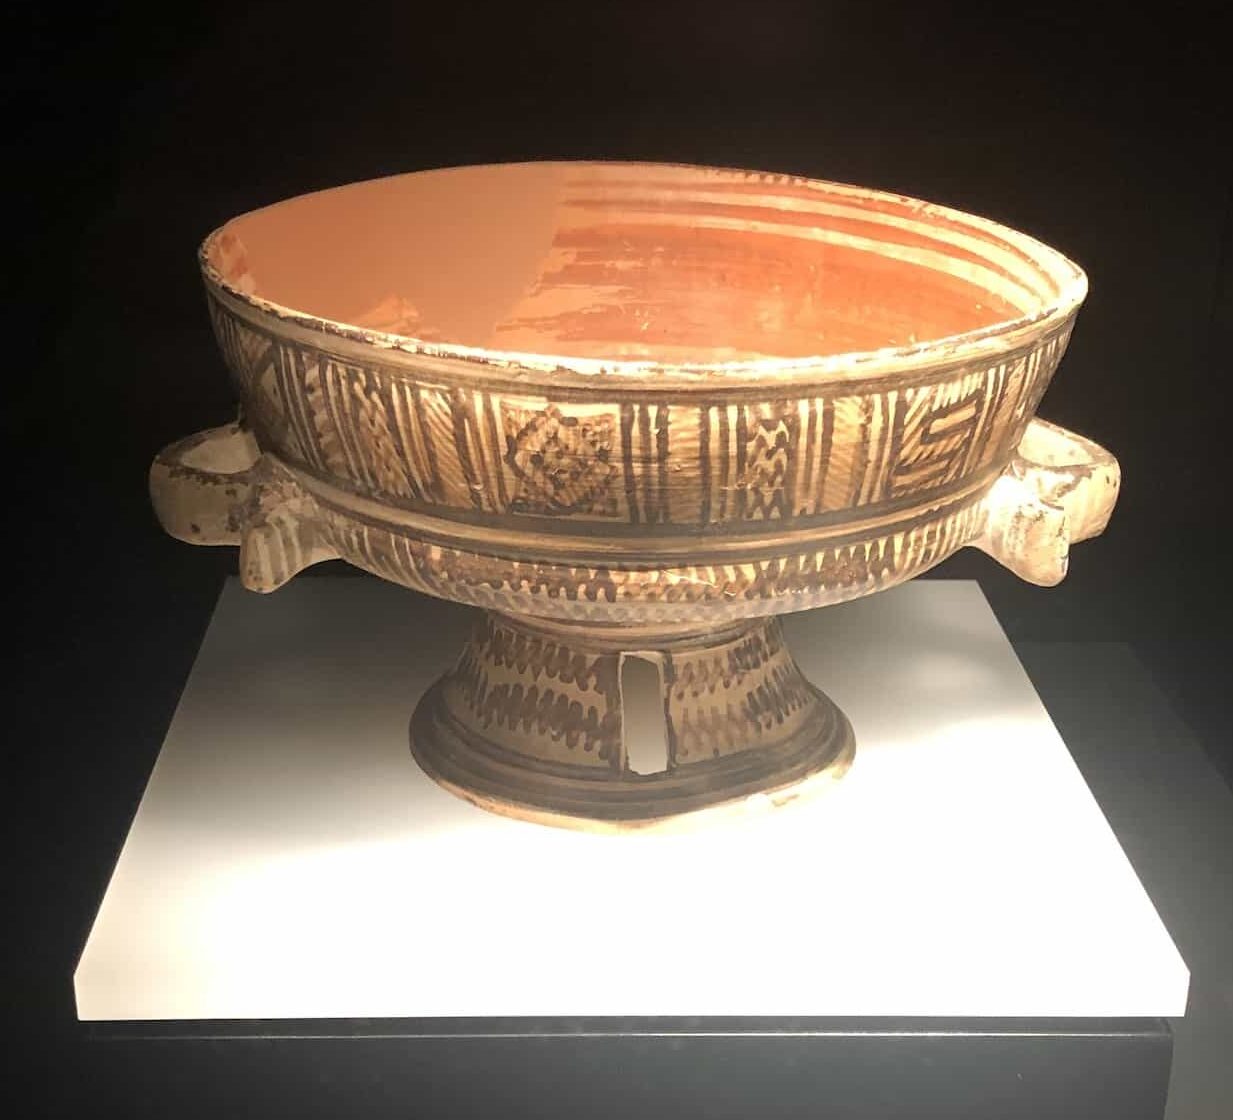 Stemmed bowl; terracotta; 8th century BC; Troy VIII at the Istanbul Archaeology Museum in Istanbul, Turkey